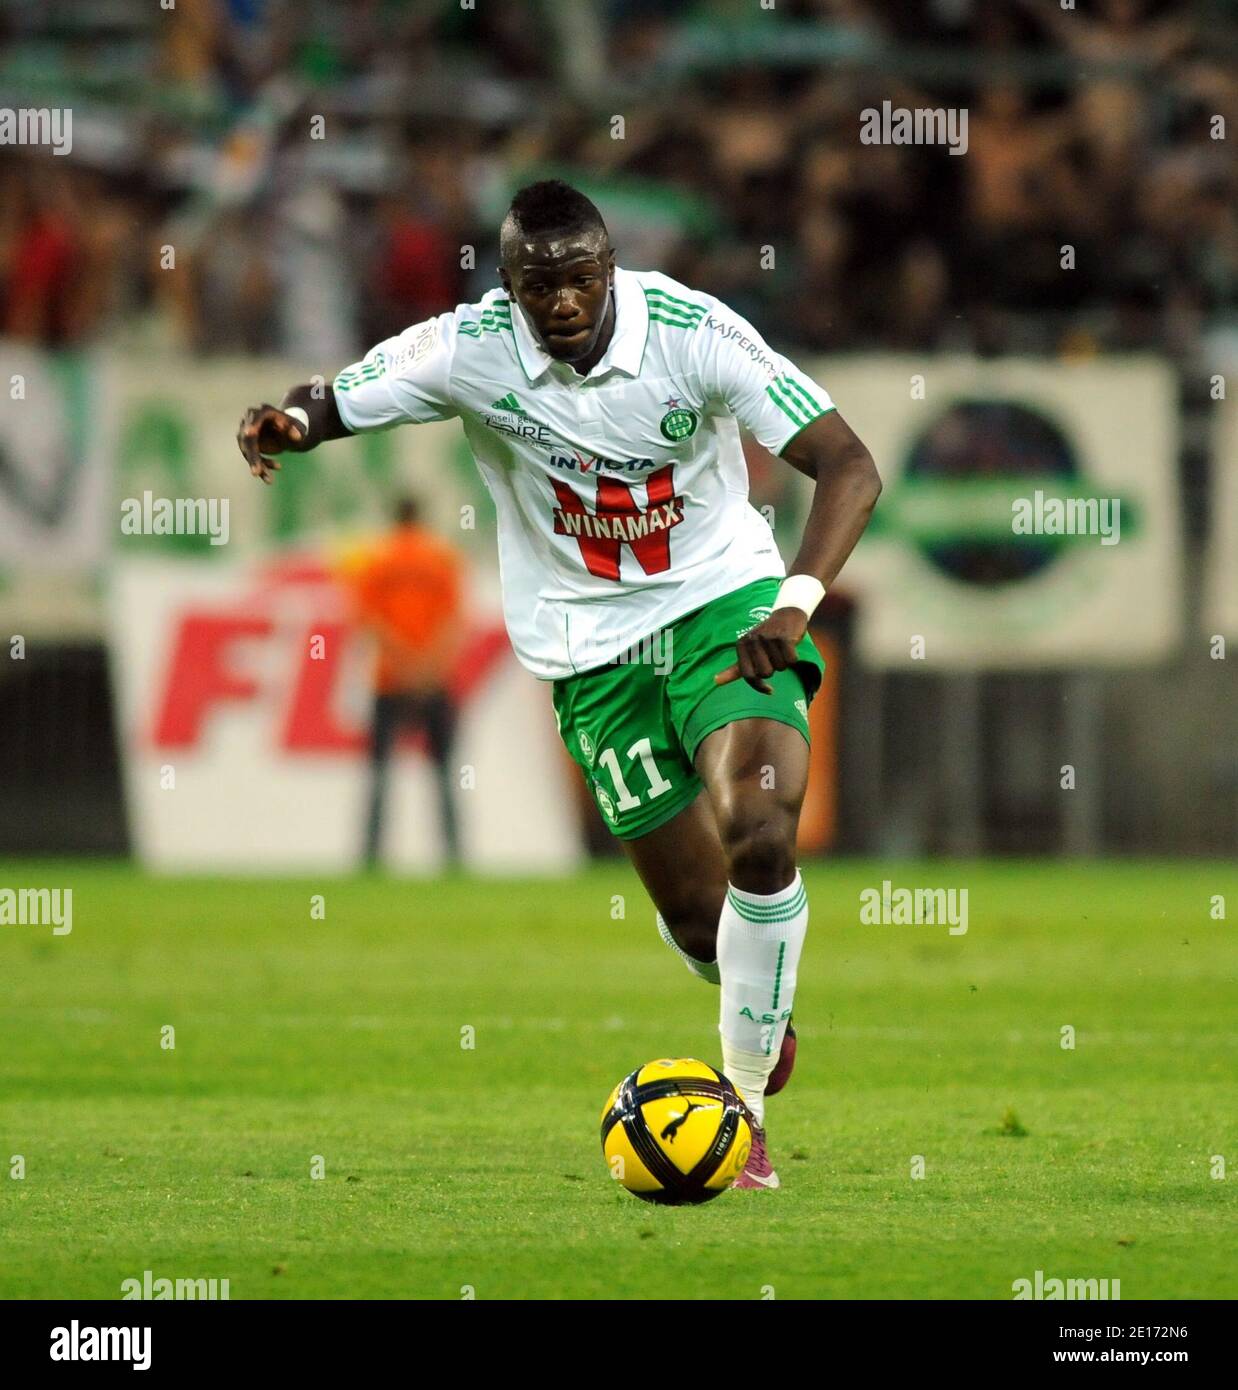 St Etienne's player Boukary Sako during the French First League soccer  match, FC Sochaux vs AS Saint-Etienne at Bonal stadium in Sochaux, France  on May 21, 2011. Sochaux won 2-1. Photo by